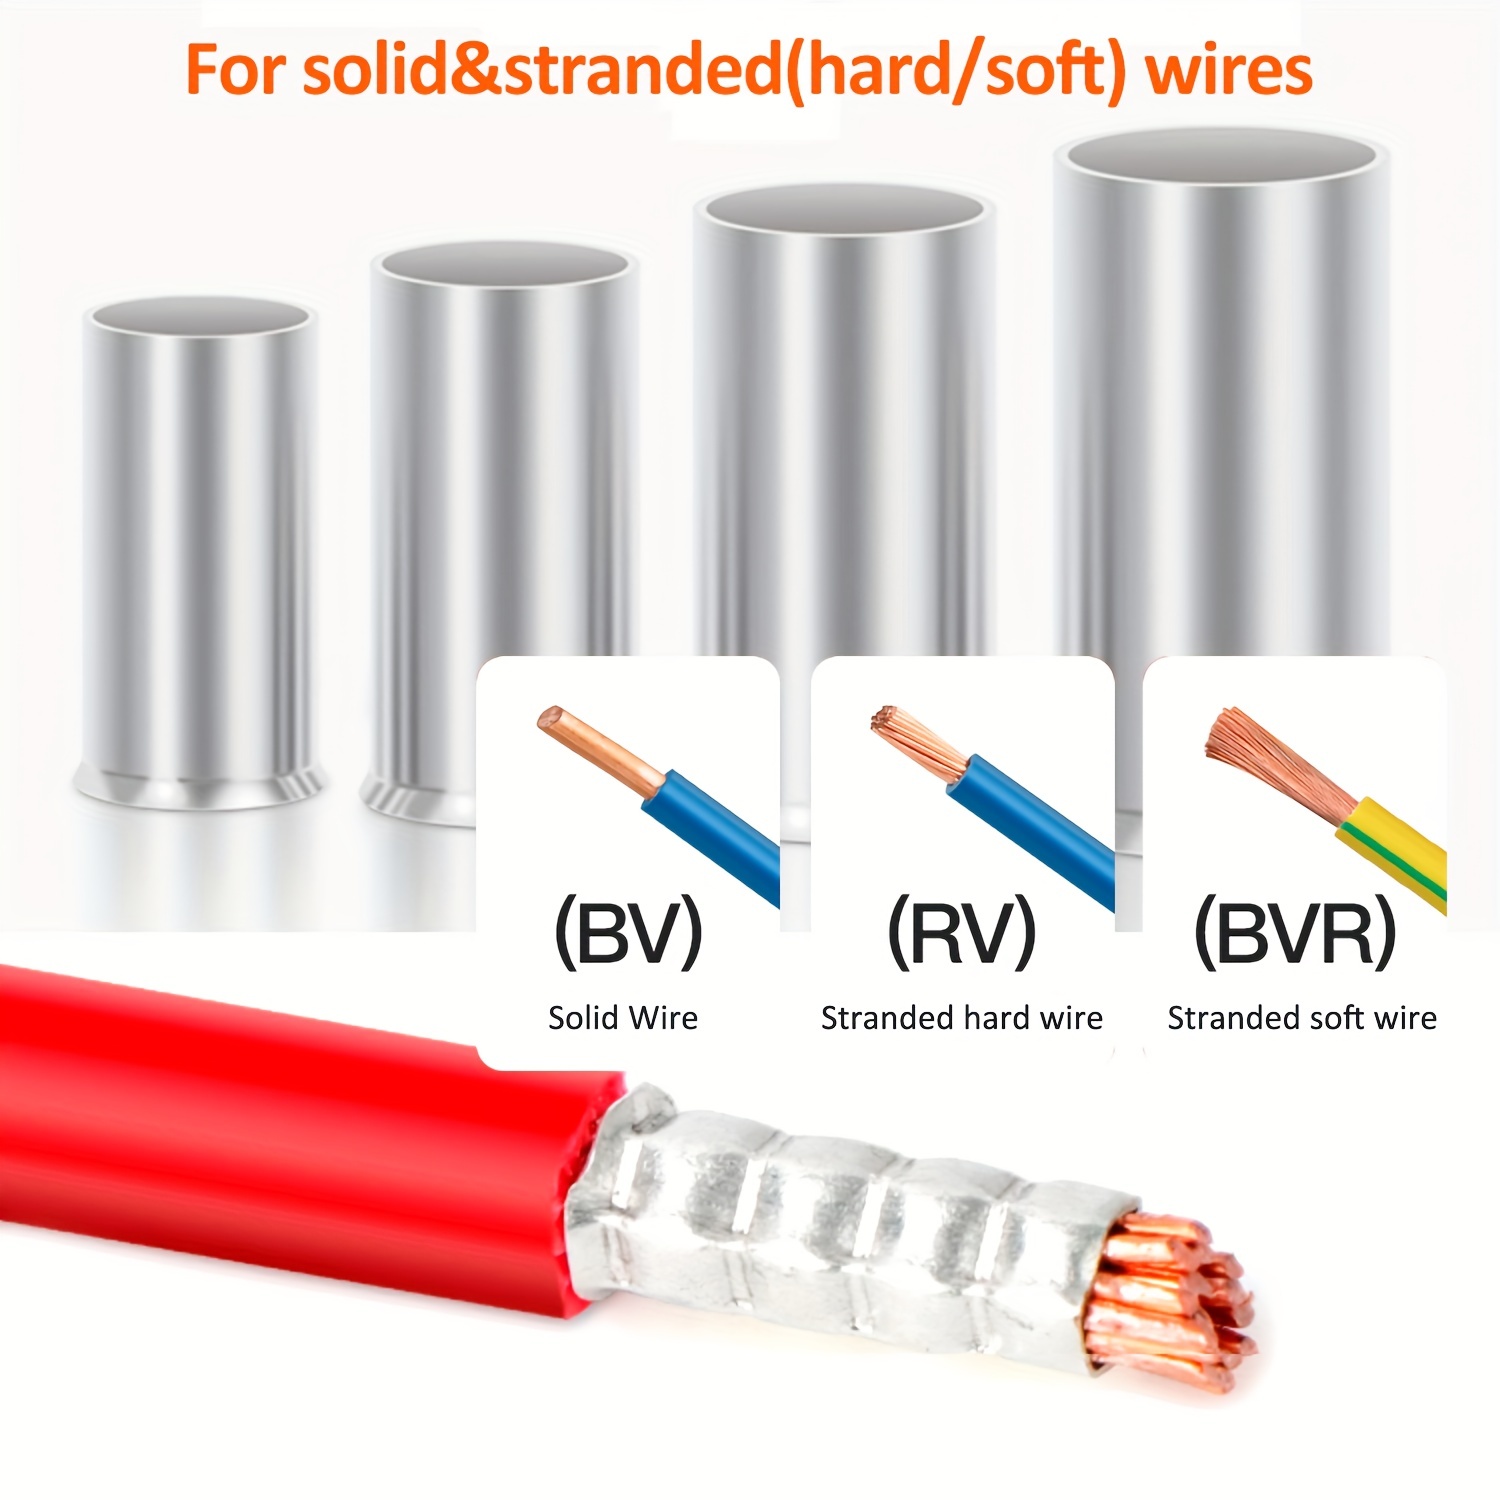 20 AWG Bare Copper Wire, 7 Sizes